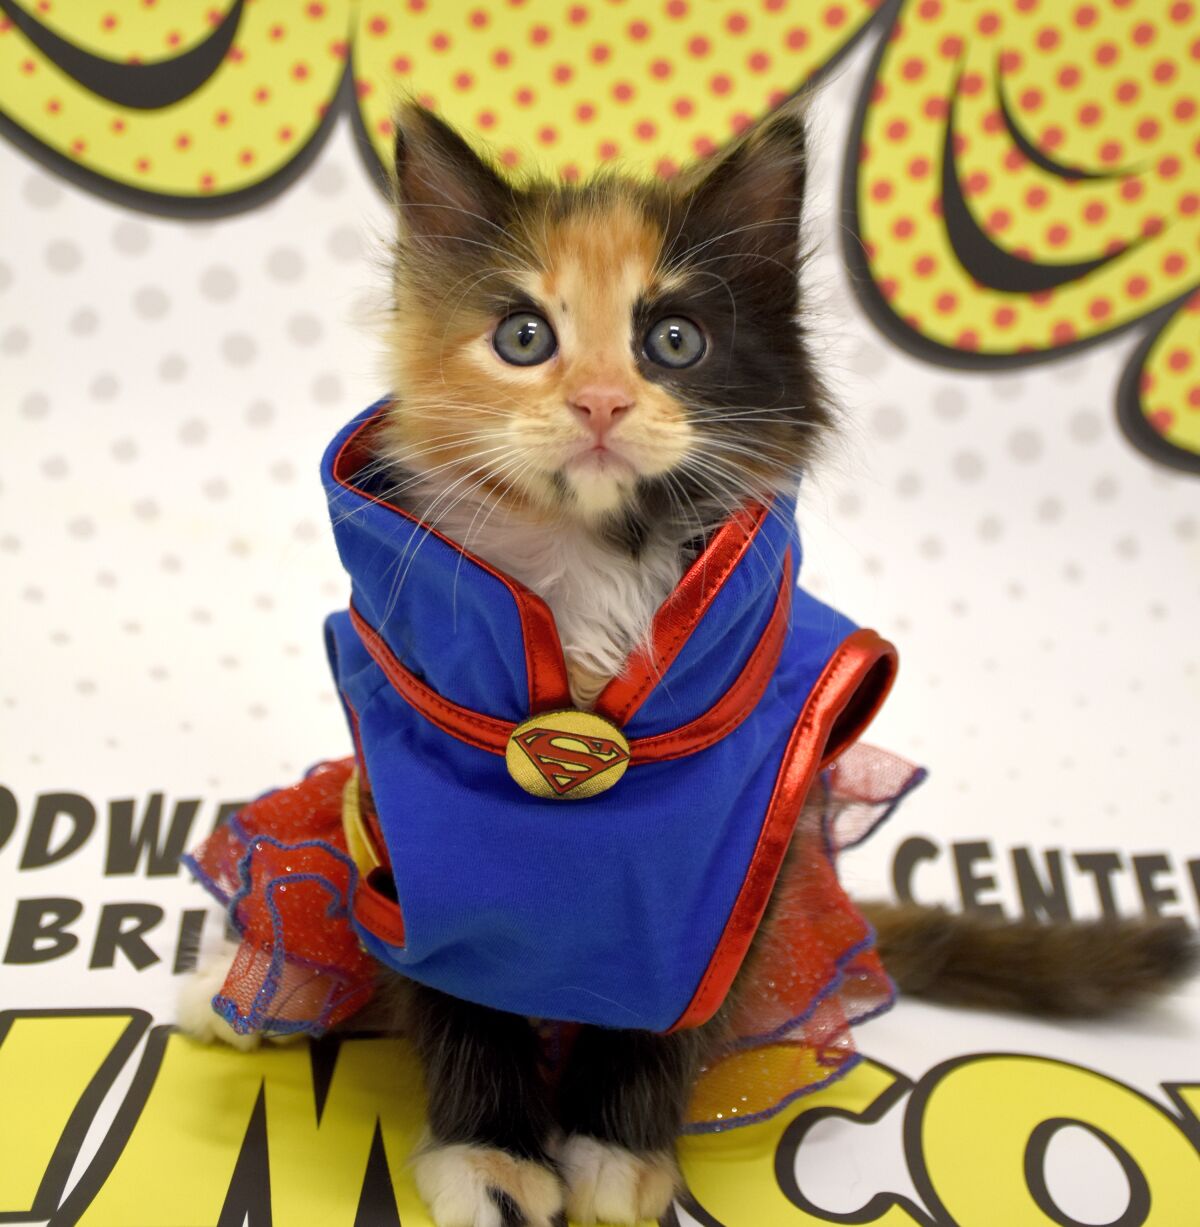 A cat dressed up as a superhero at PAWmicon